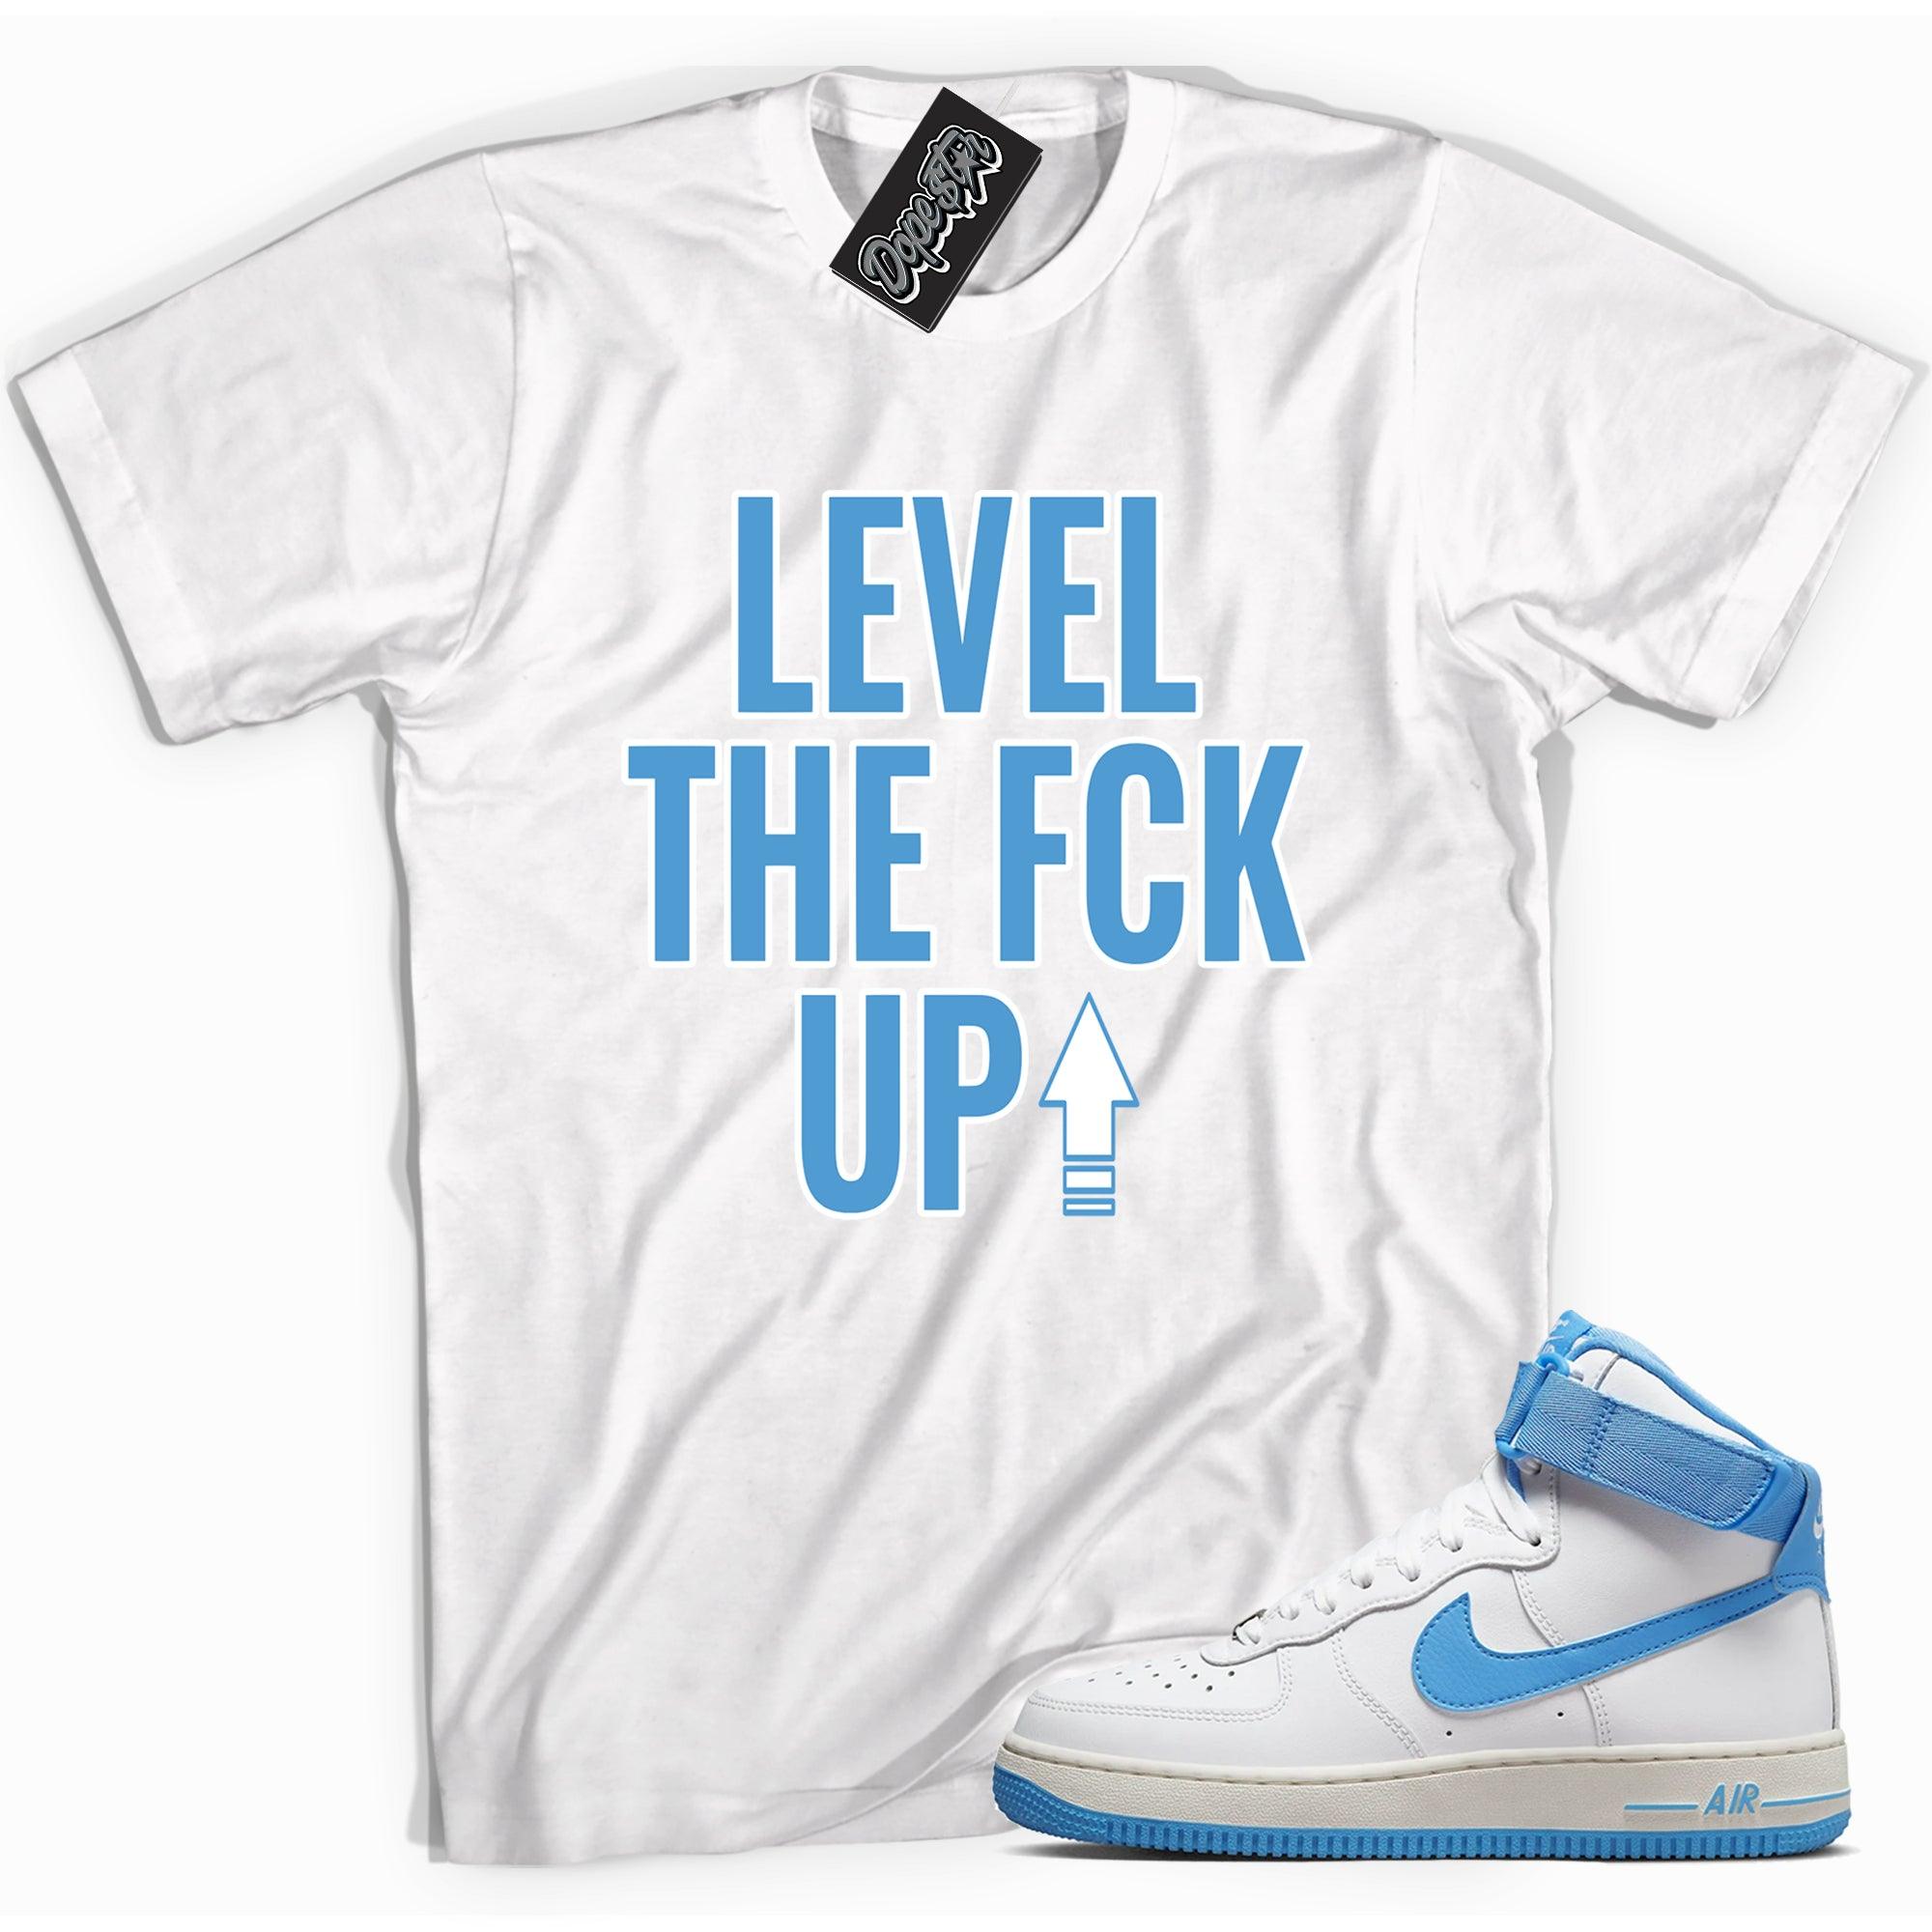 Cool white graphic tee with 'Level Up' print, that perfectly matches NIKE Air force 1 High White University Blue sneakers.